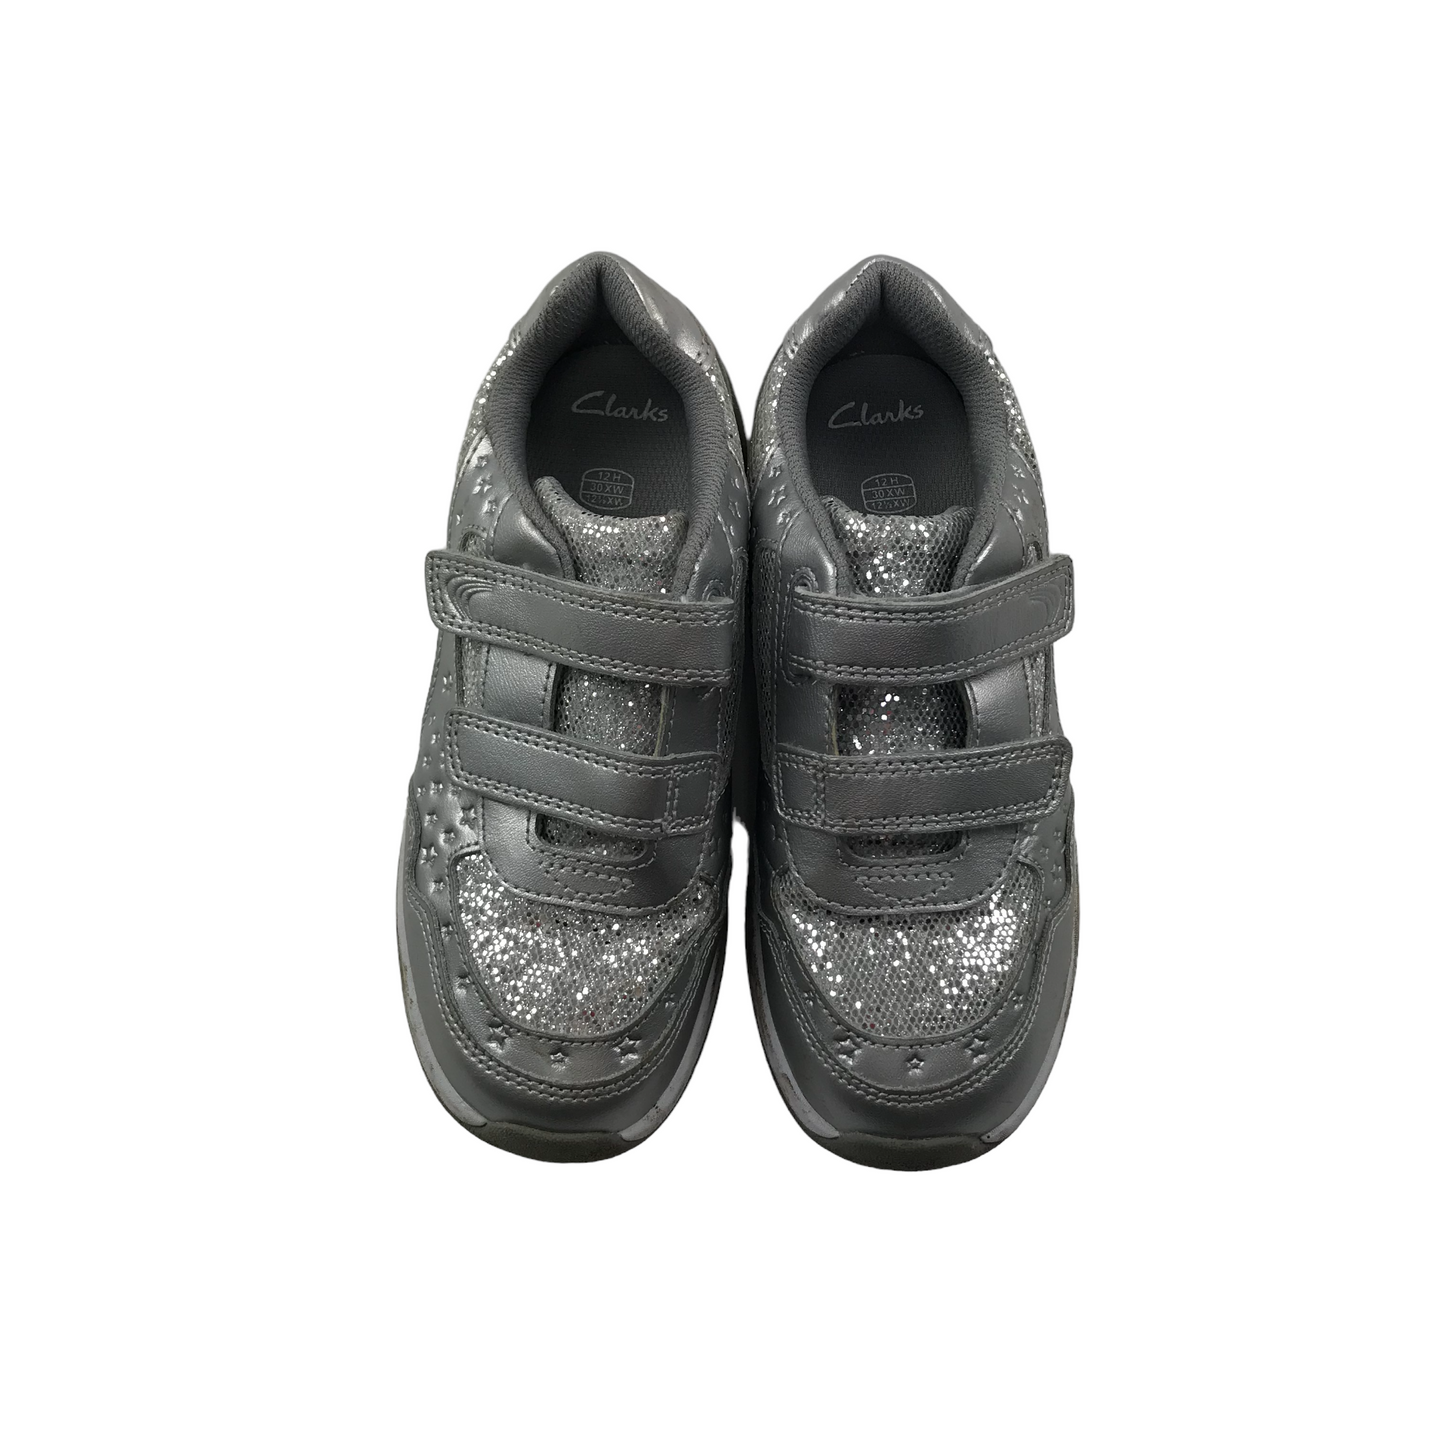 Clarks Sparkly Silver Trainers Shoe Size 12H junior